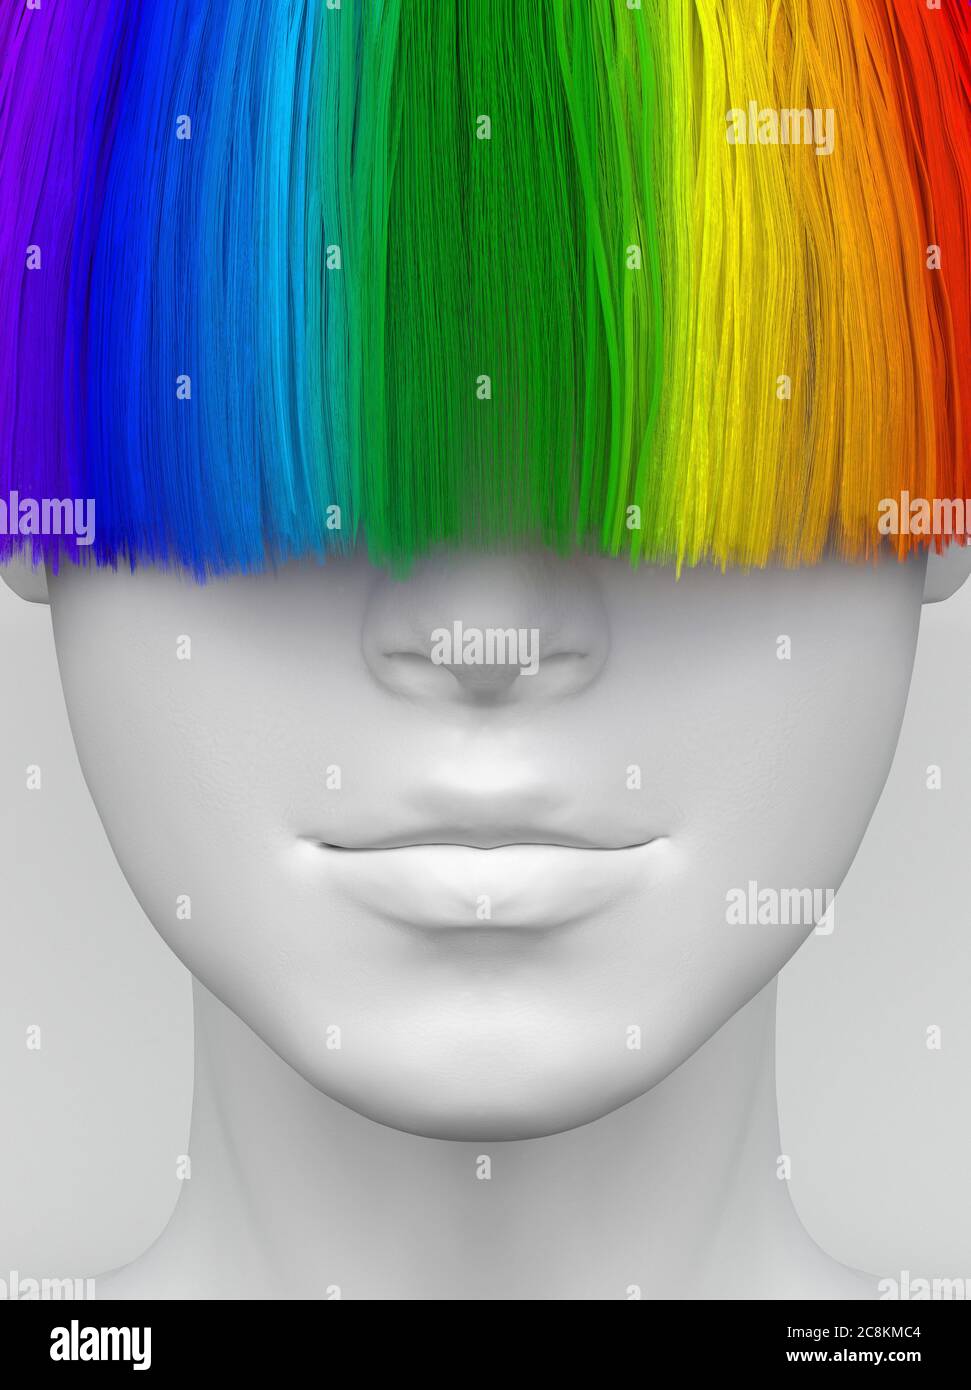 White woman's face with long multicolored bangs covering her eyes. Bright colorful hair. Creative conceptual illustration. 3D render Stock Photo